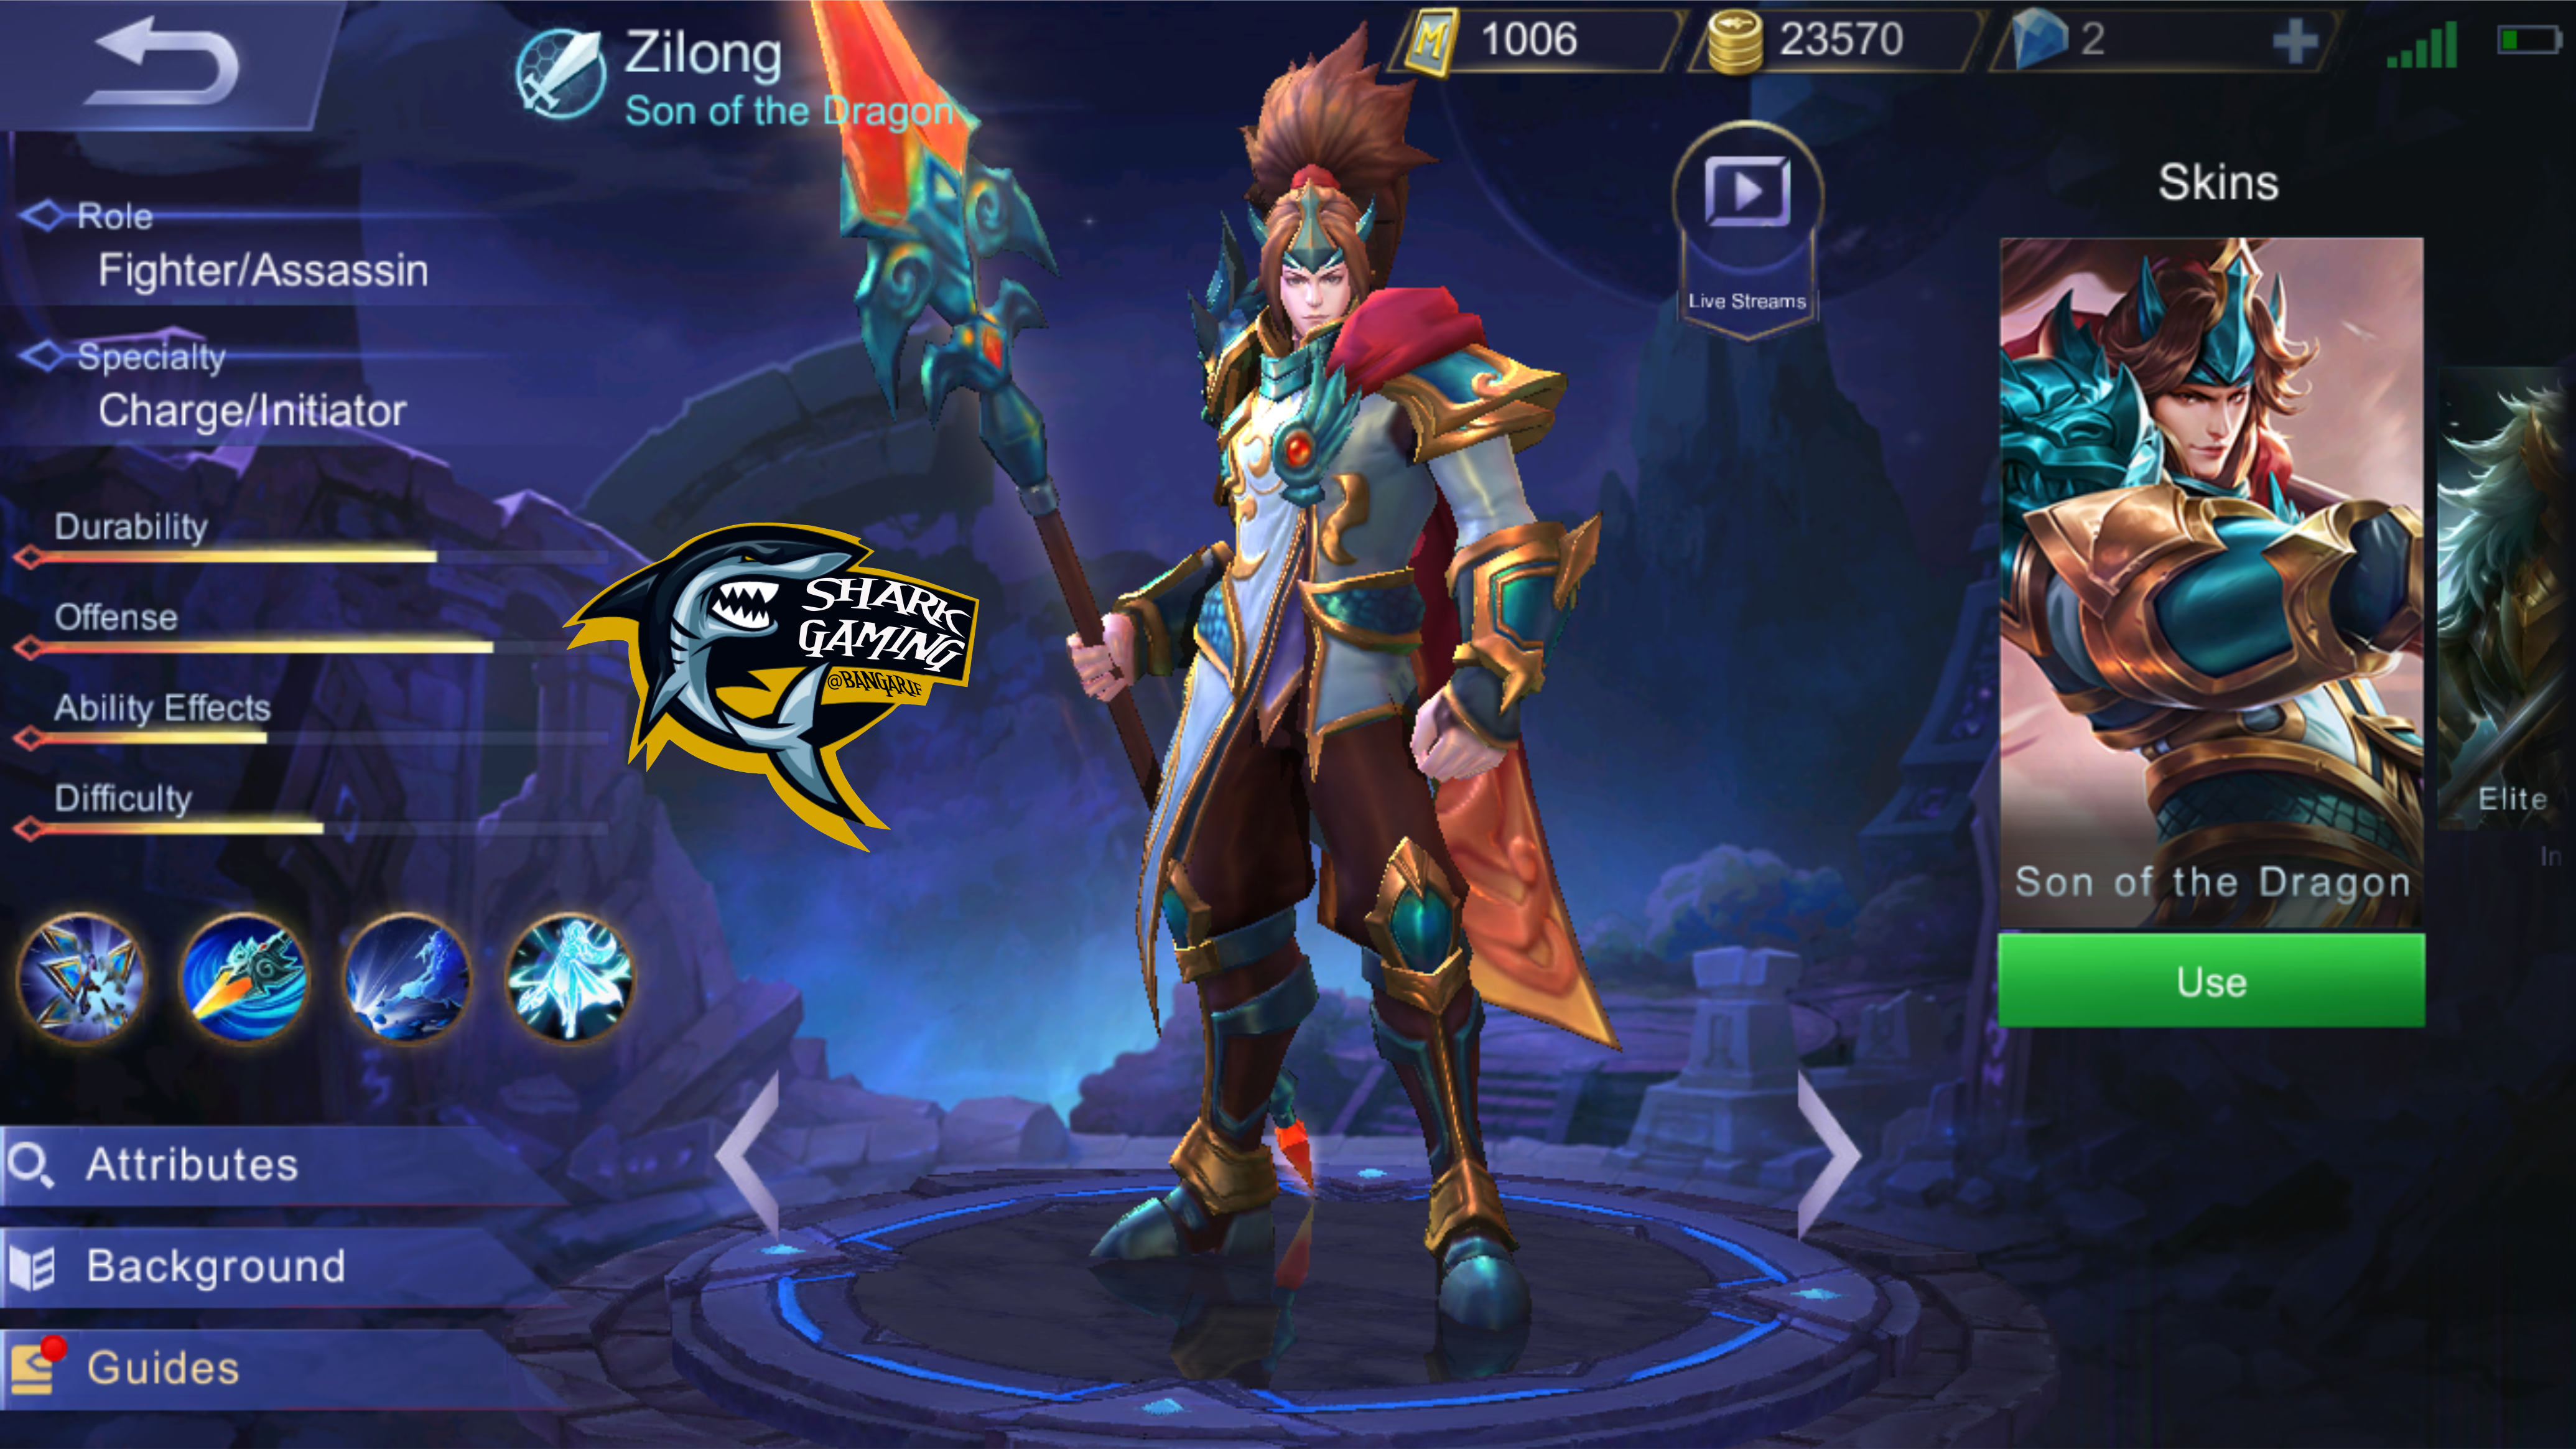 Game Review Hero Review Edition Zilong The Son Of The Dragon Fighter Mobile Legends Bang